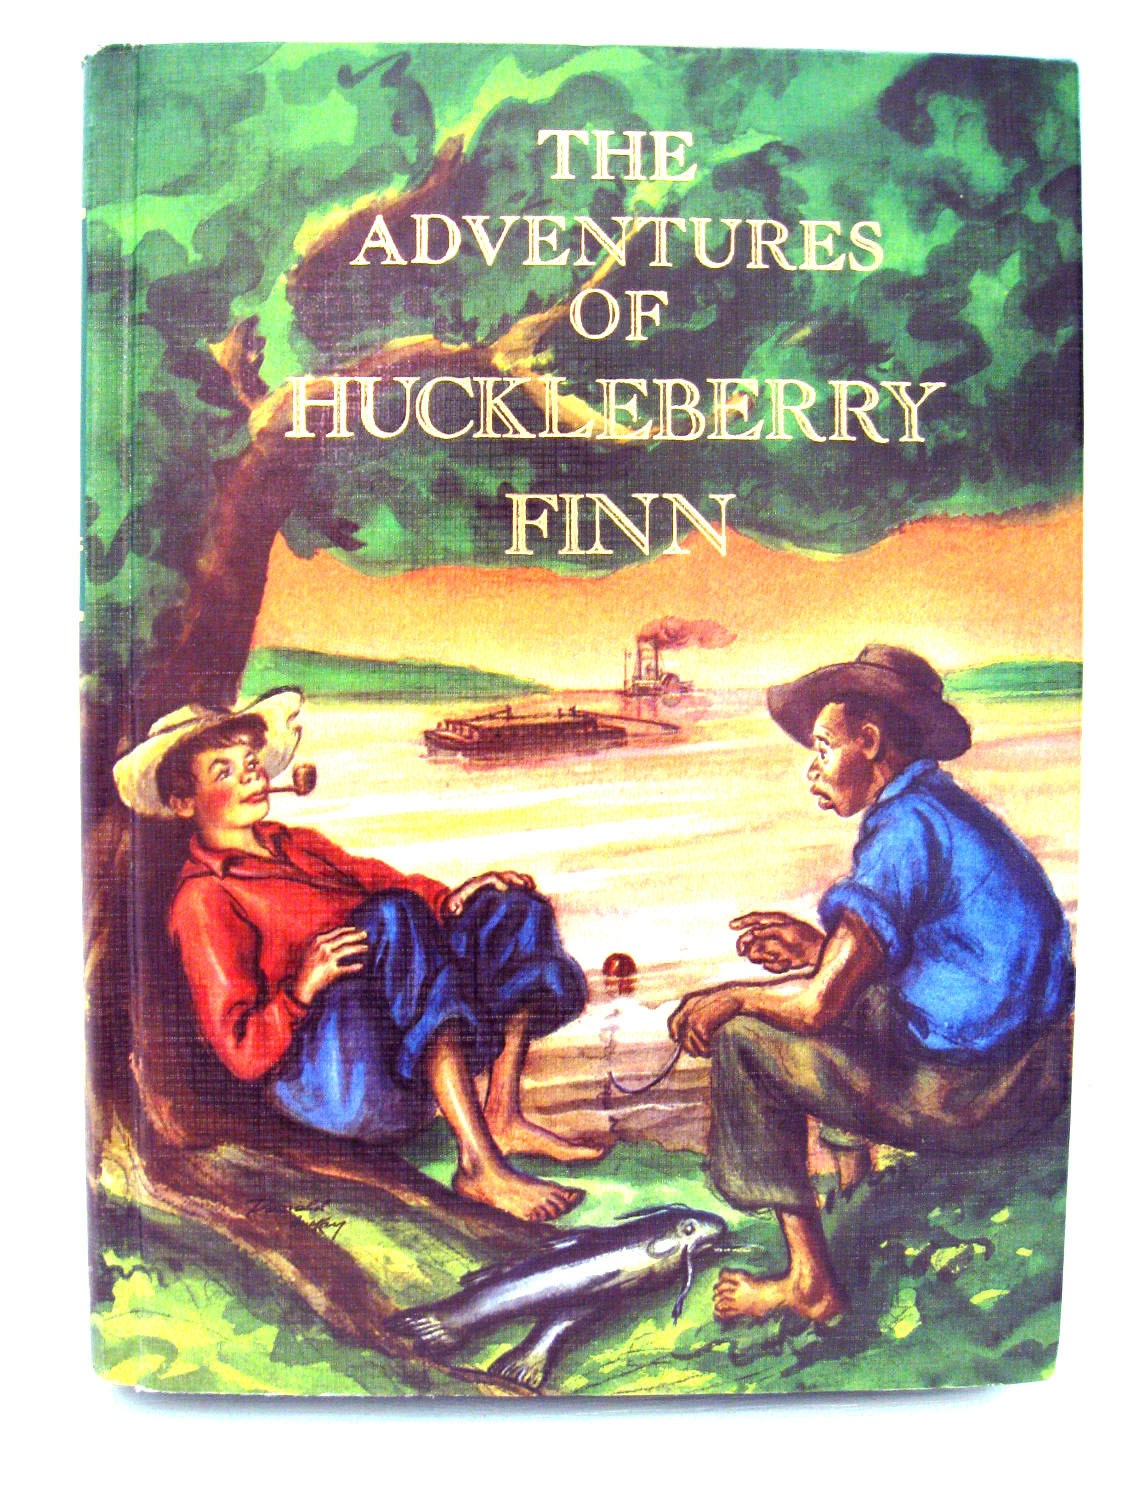 The Adventures of Huckleberry Finn download the new version for ipod